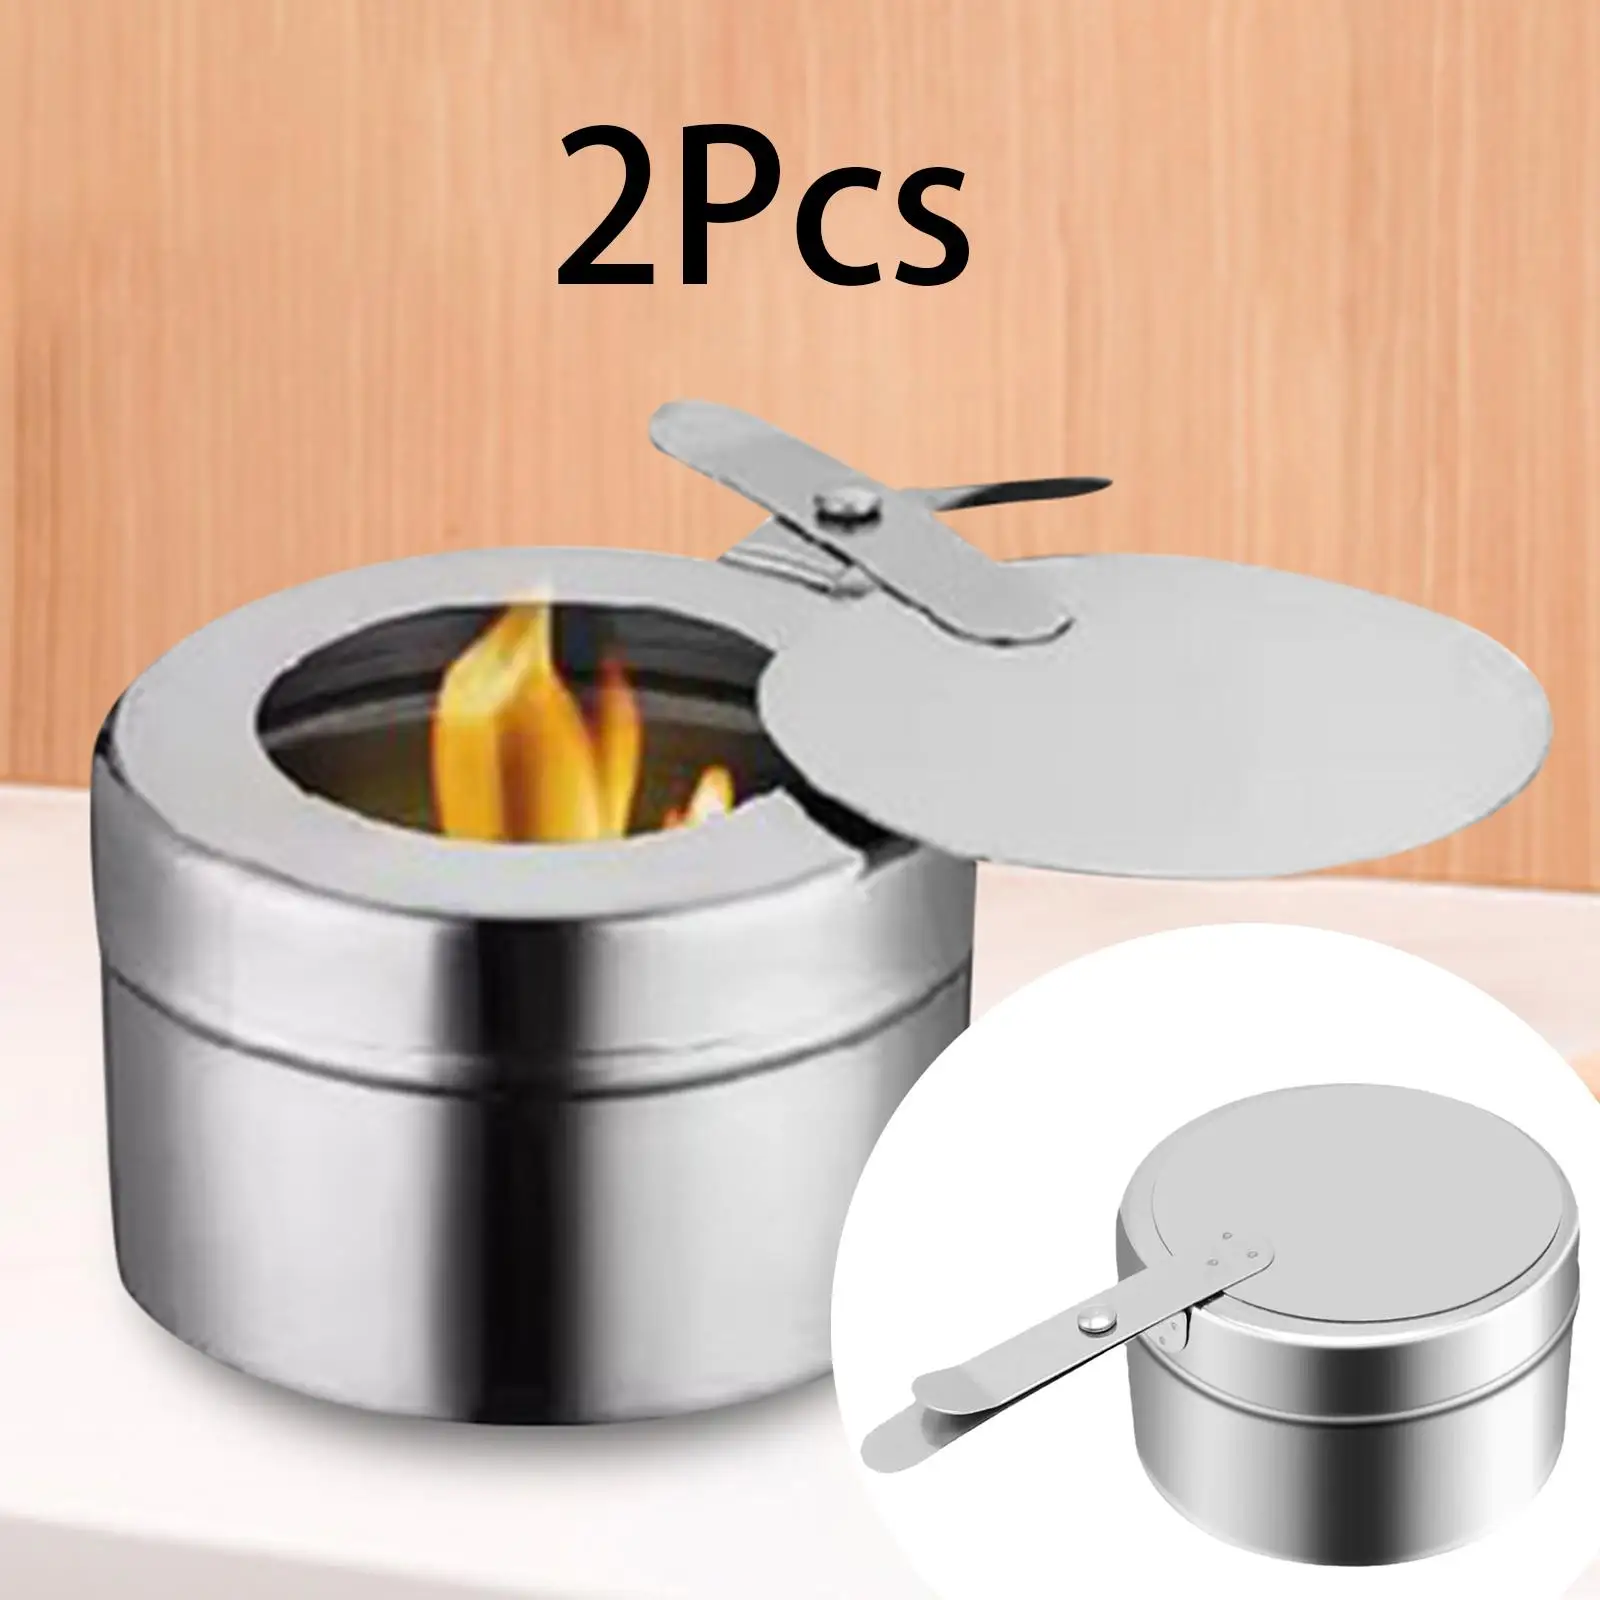 2 Pieces Buffet Warmer Fuel Holder Canned Fuel Boxes Parties Fuel Cans Holder Set for Catering Events Warmer Party